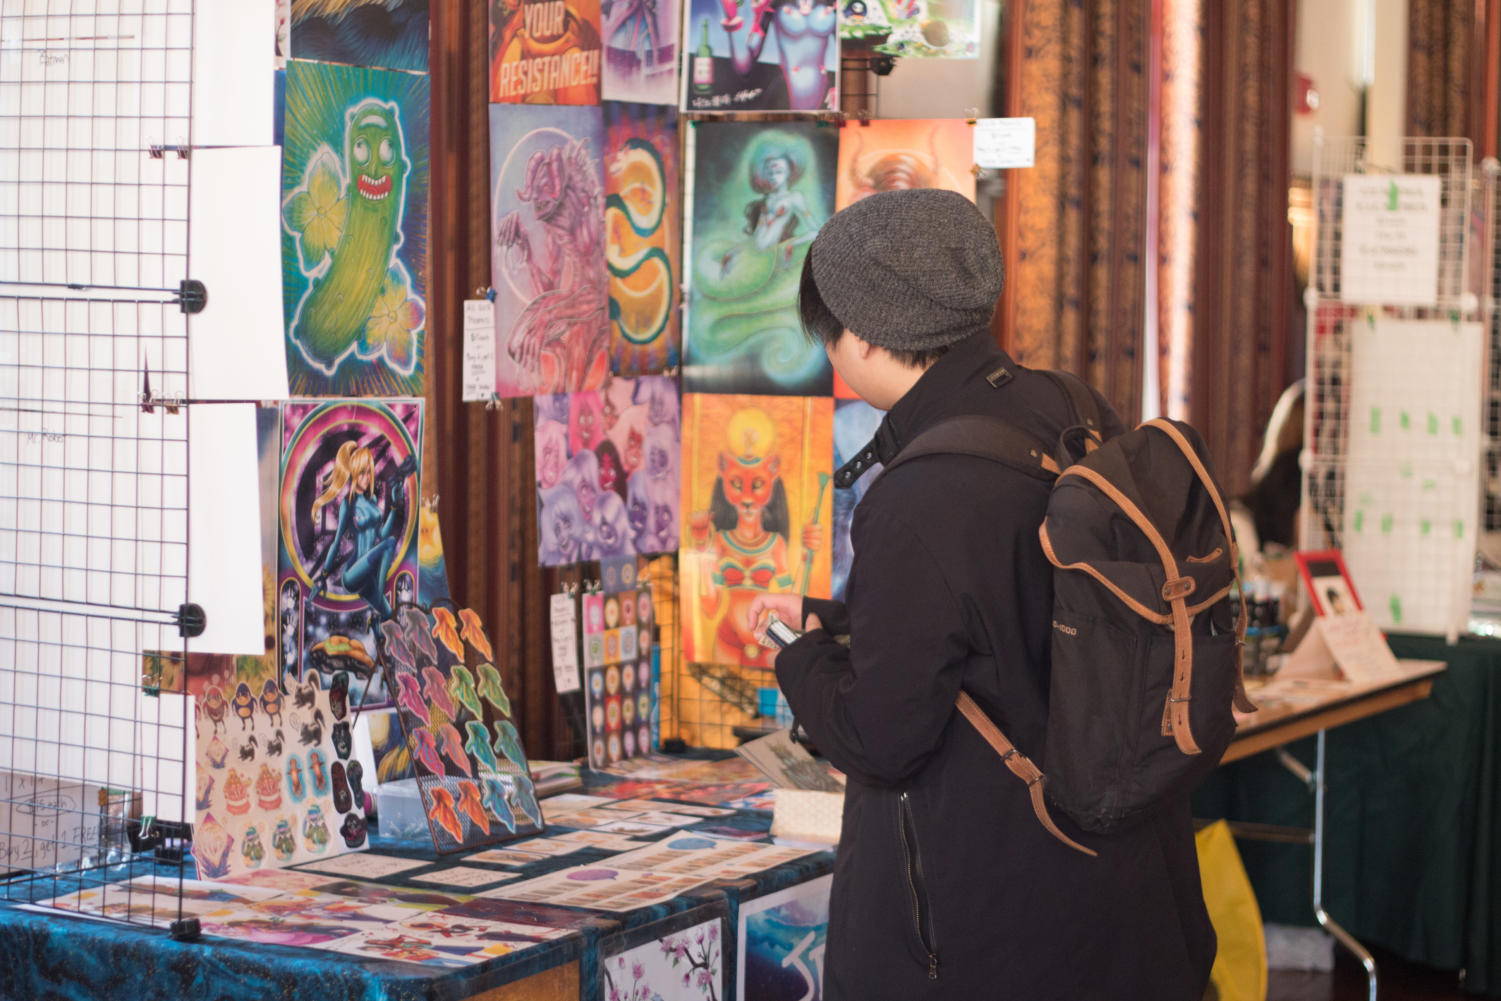 Attendees check out Artist’s Alley, where UChicago students and community members sold their original fan-art.